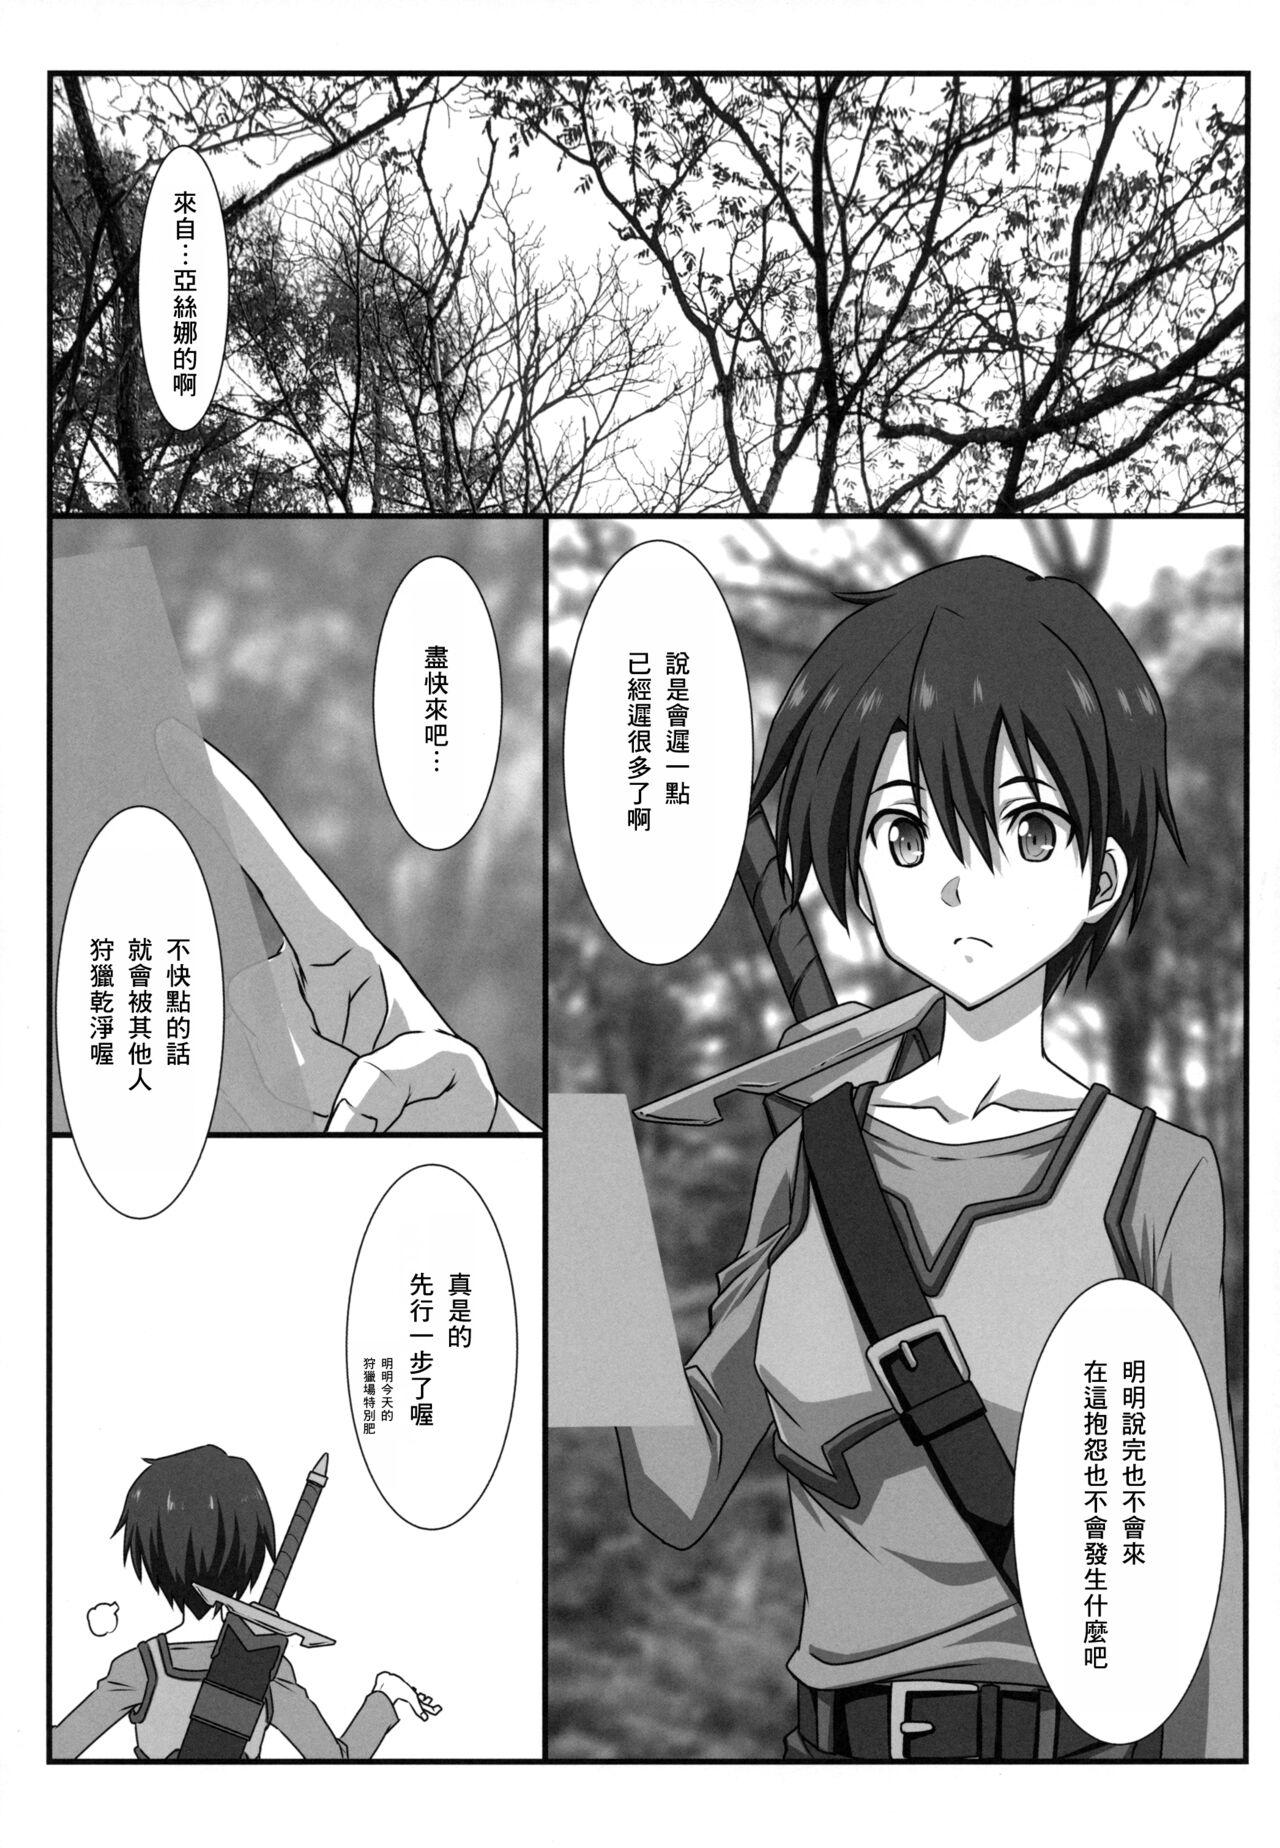 Safadinha Astral Bout Ver. 47 - Sword art online Groupfuck - Page 4